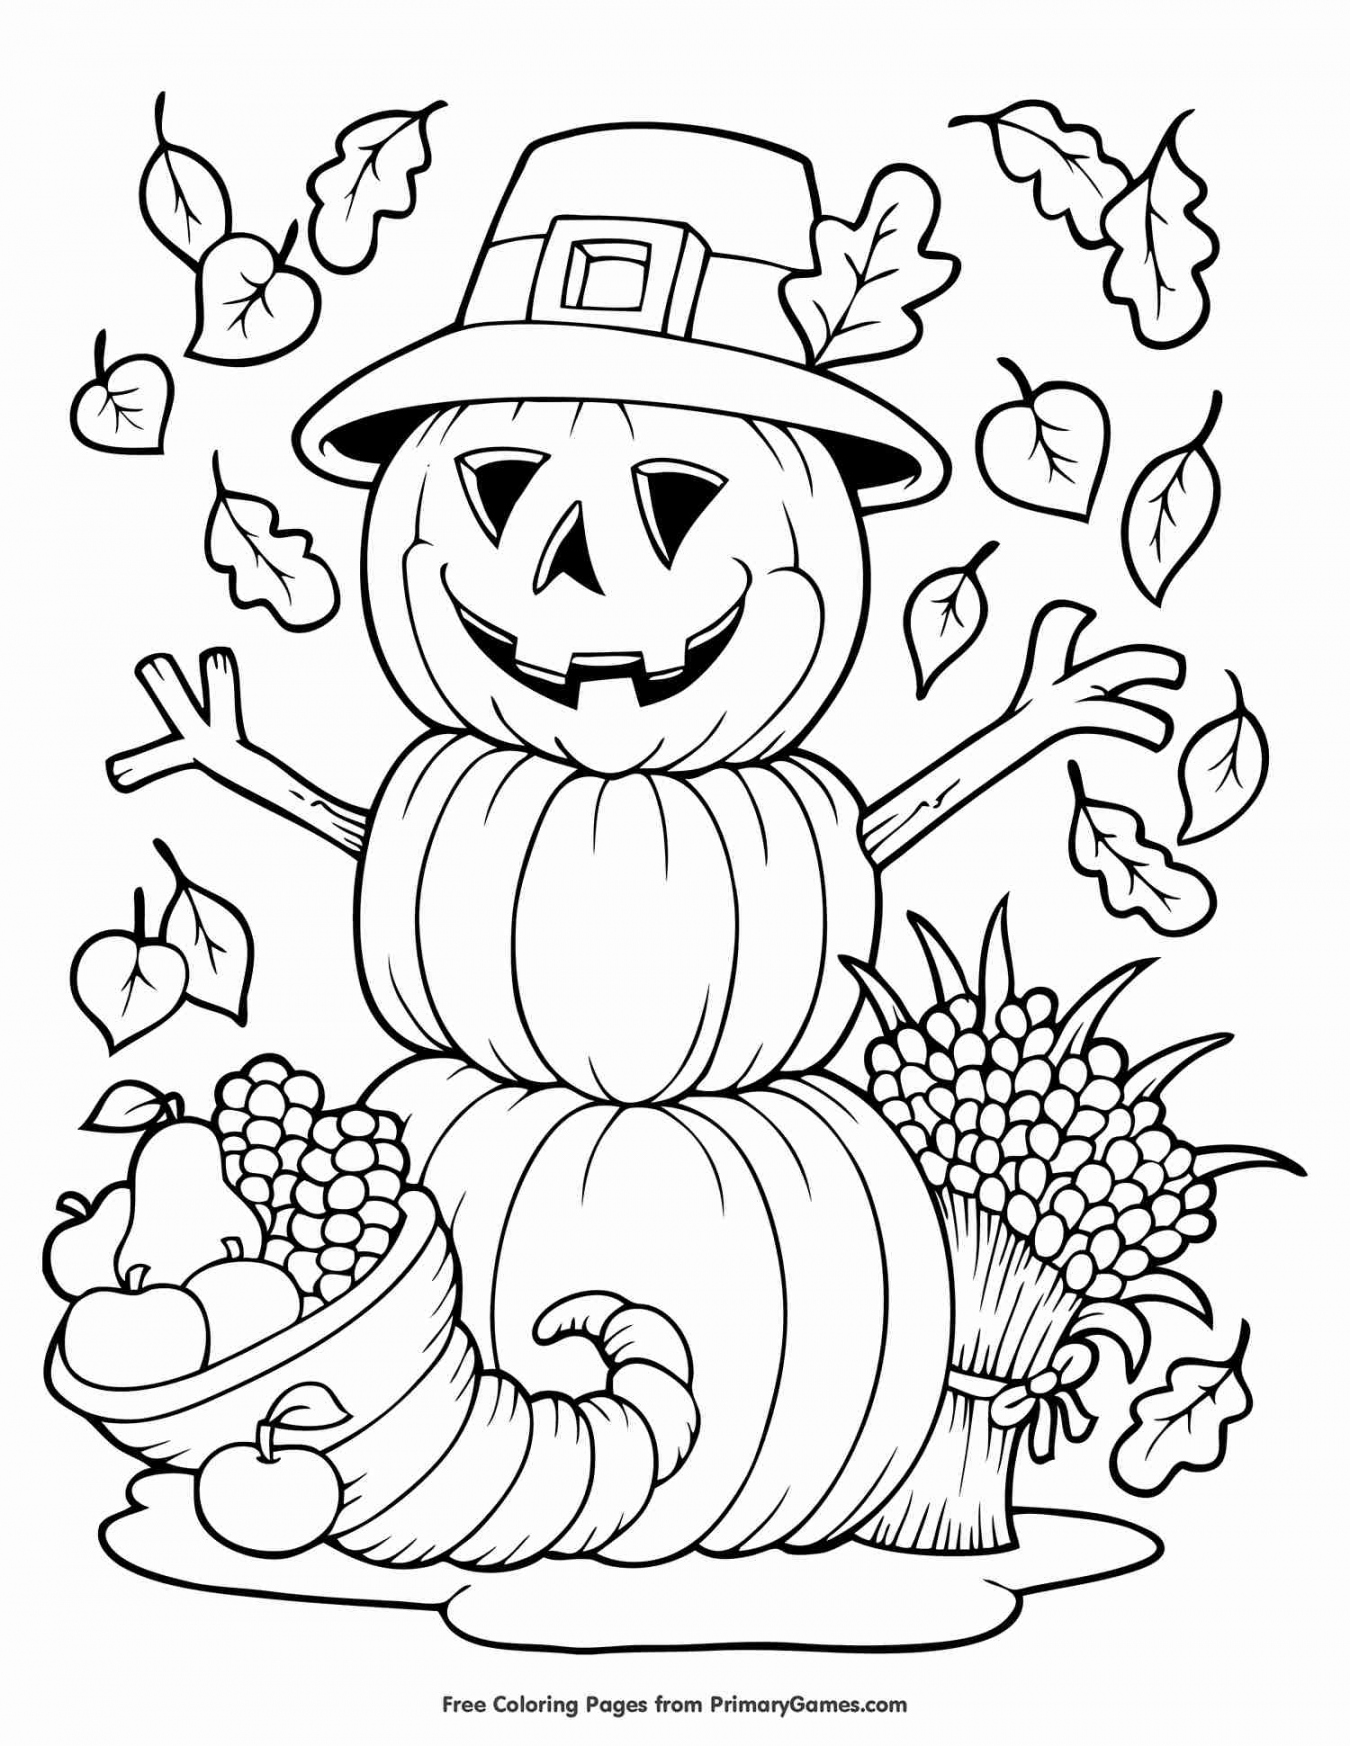 Fall Coloring Pages Free Printable - Printable -  Places to Find Free Autumn and Fall Coloring Pages